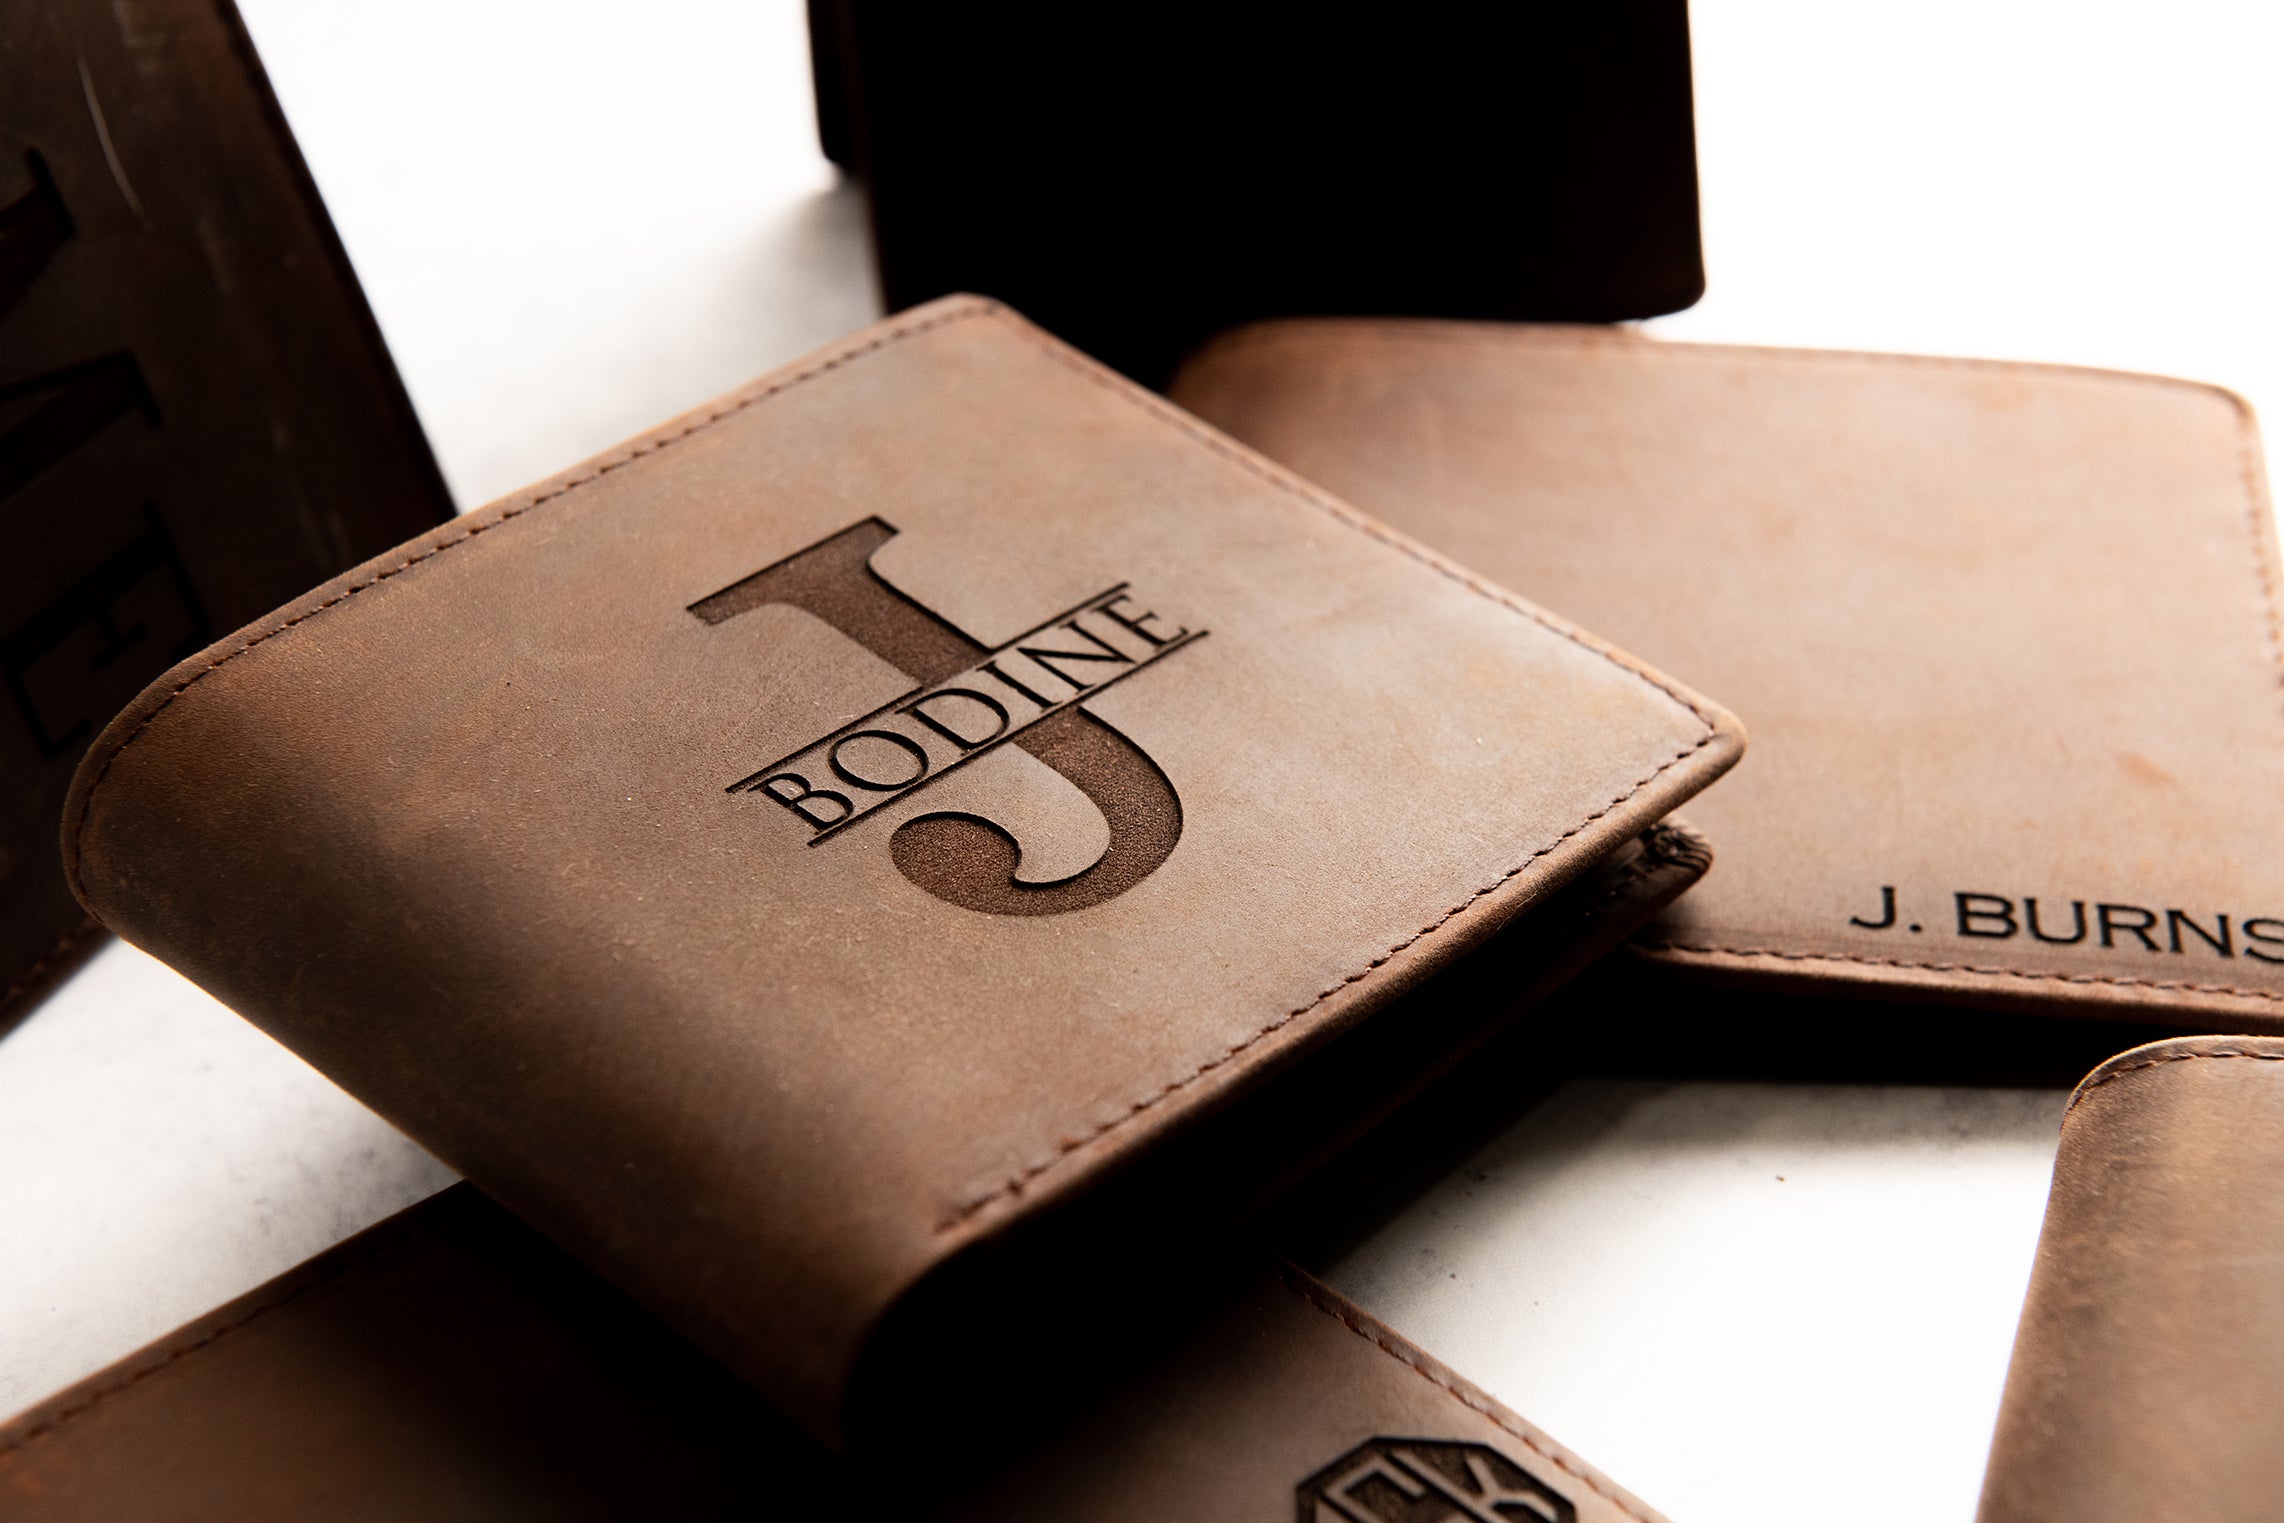 Personalized Leather TRIFOLD WALLET, Bifold ID Holder, Cash Wallet,  Monogrammed Gift For Him, Add Initial Name and Text